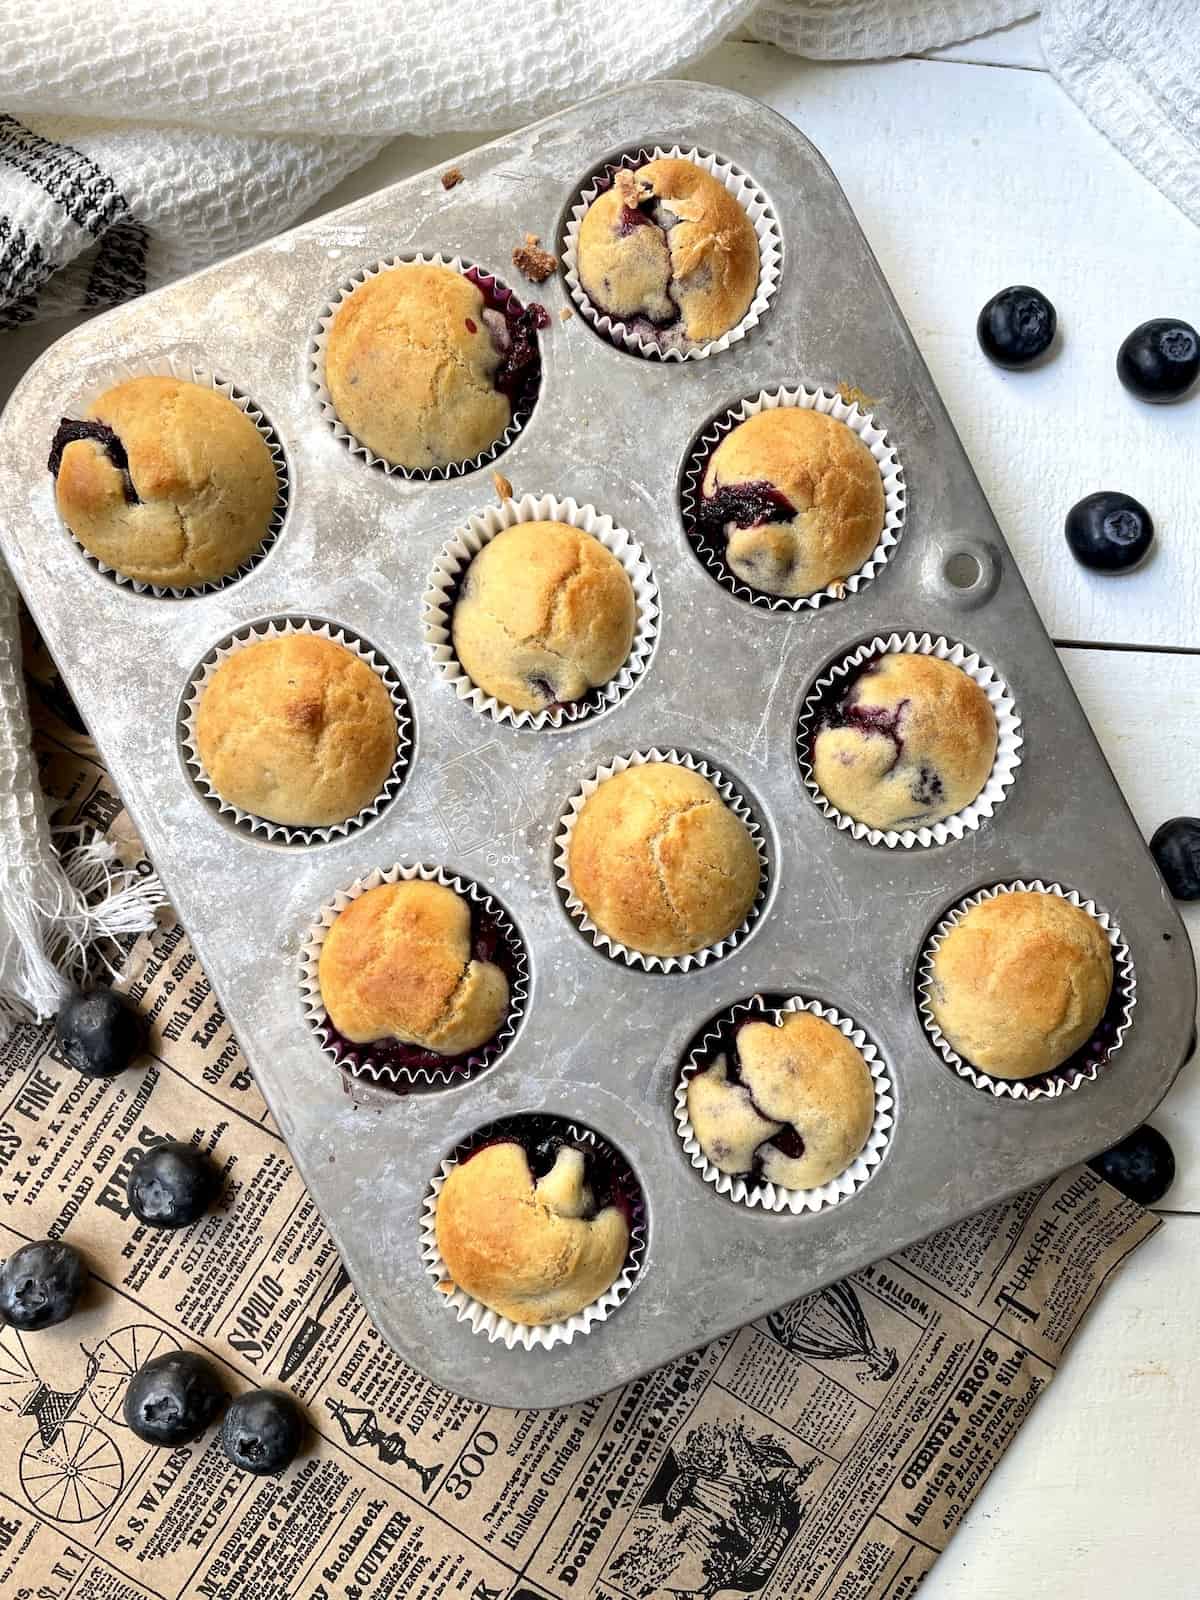 Weight Watchers blueberry muffins recipe baked in pan.